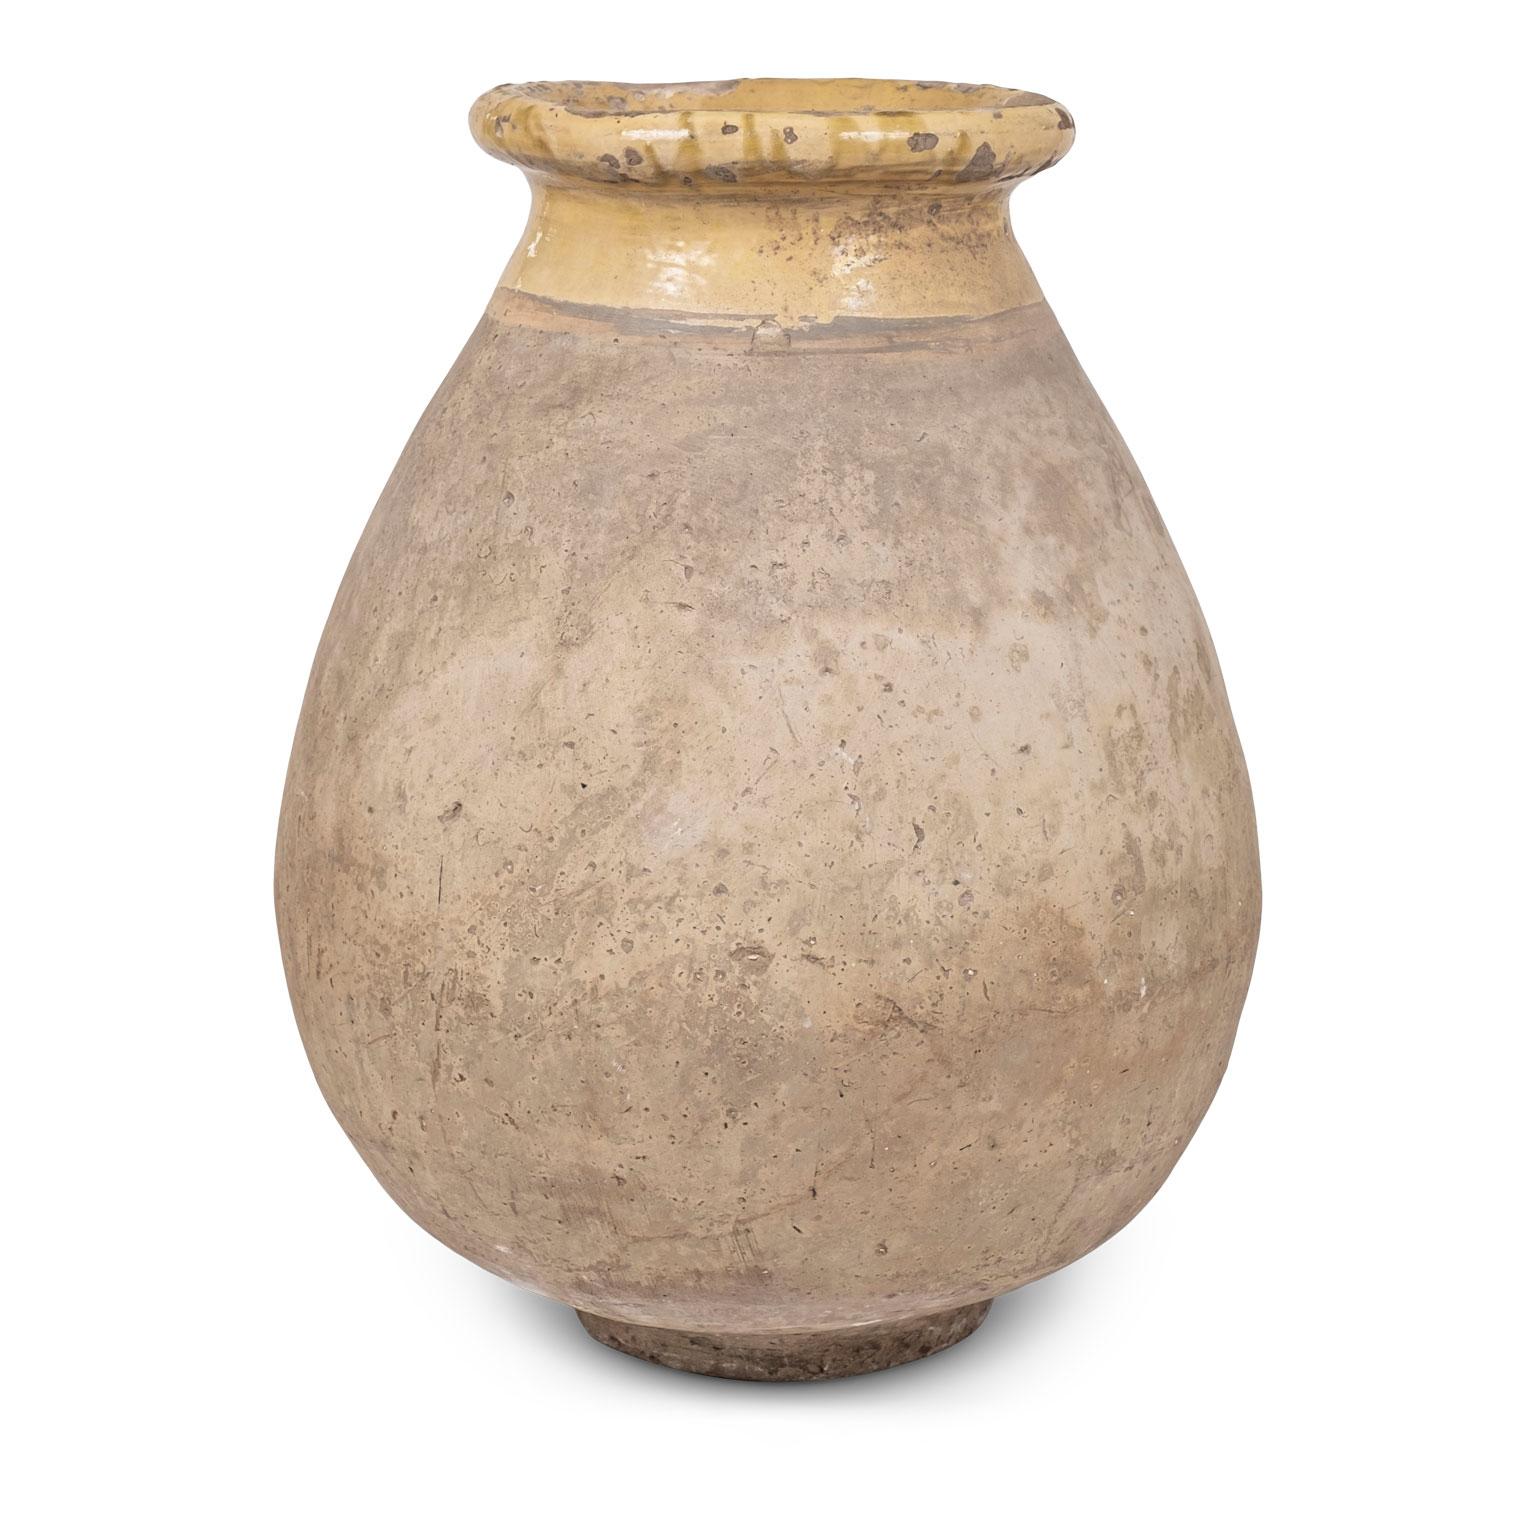 Large French biot jar dating to the mid-early 19th century.